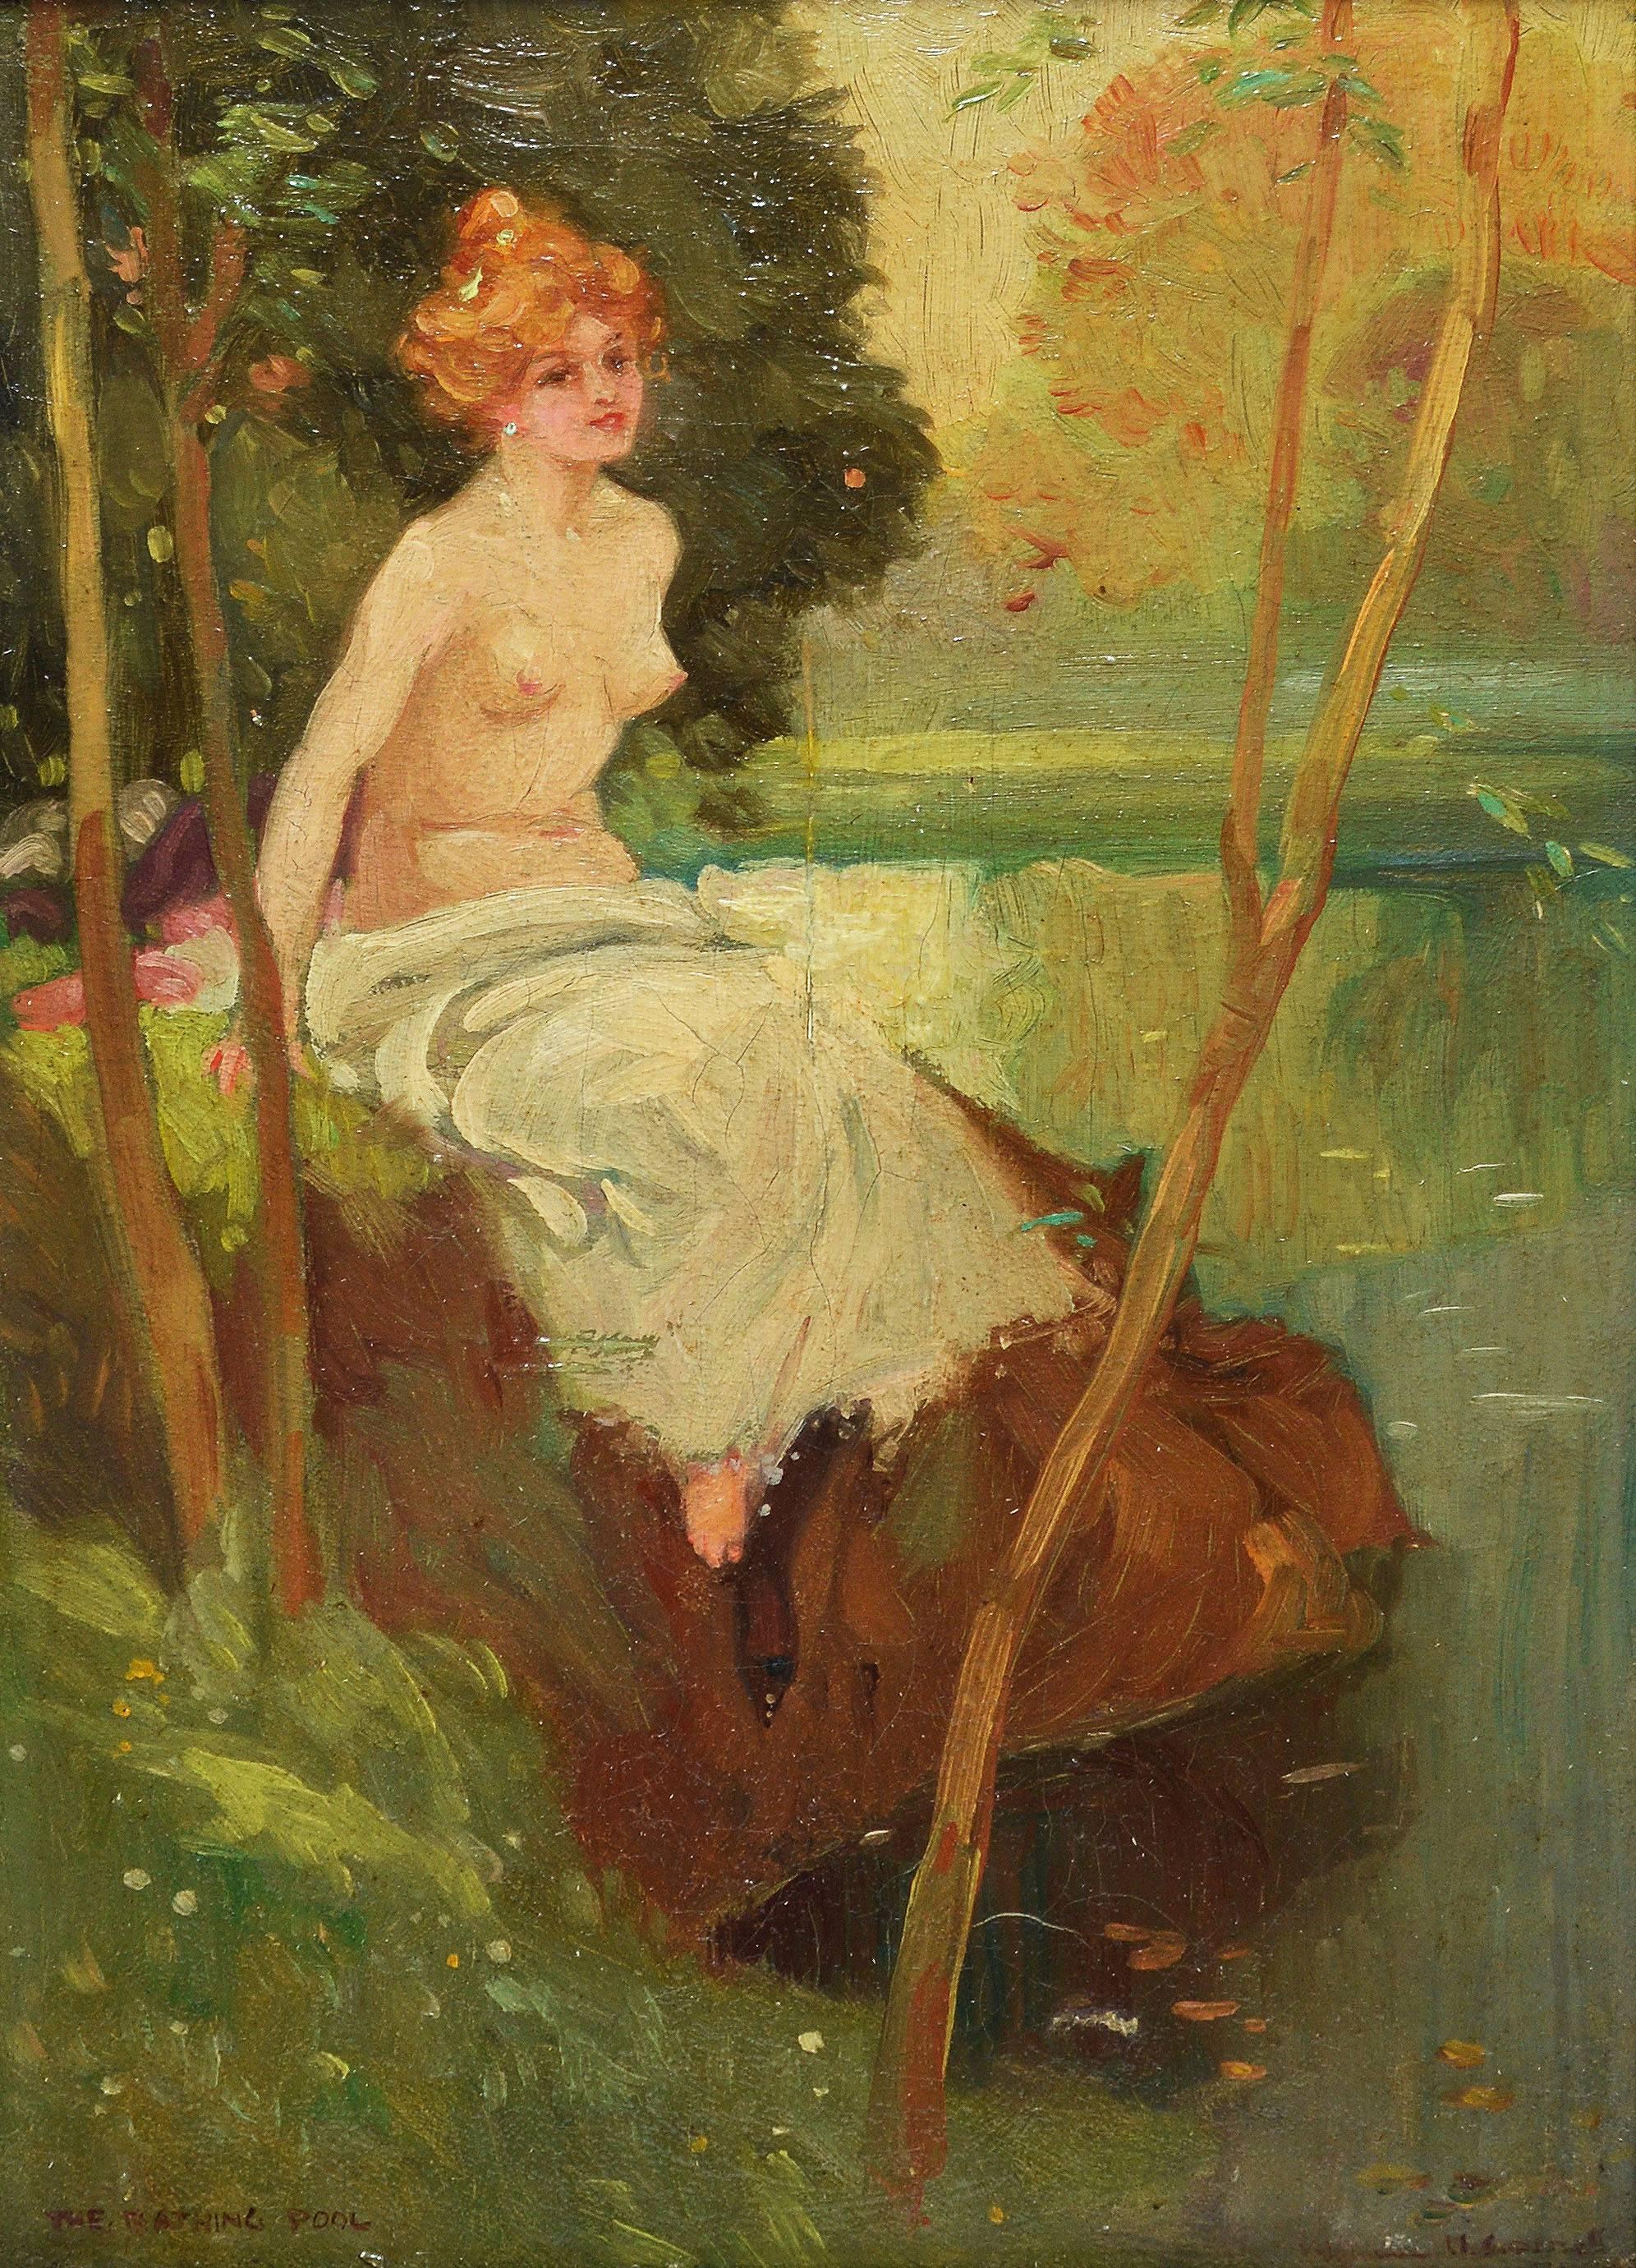 Impressionist painting of a landscape with a nude bather. Oil on canvas, circa 1890. Signed lower right, illegibly. Displayed in a period frame, some losses to the frame. Image size 8"L x 12"H, overall 12"L x 16"H.
